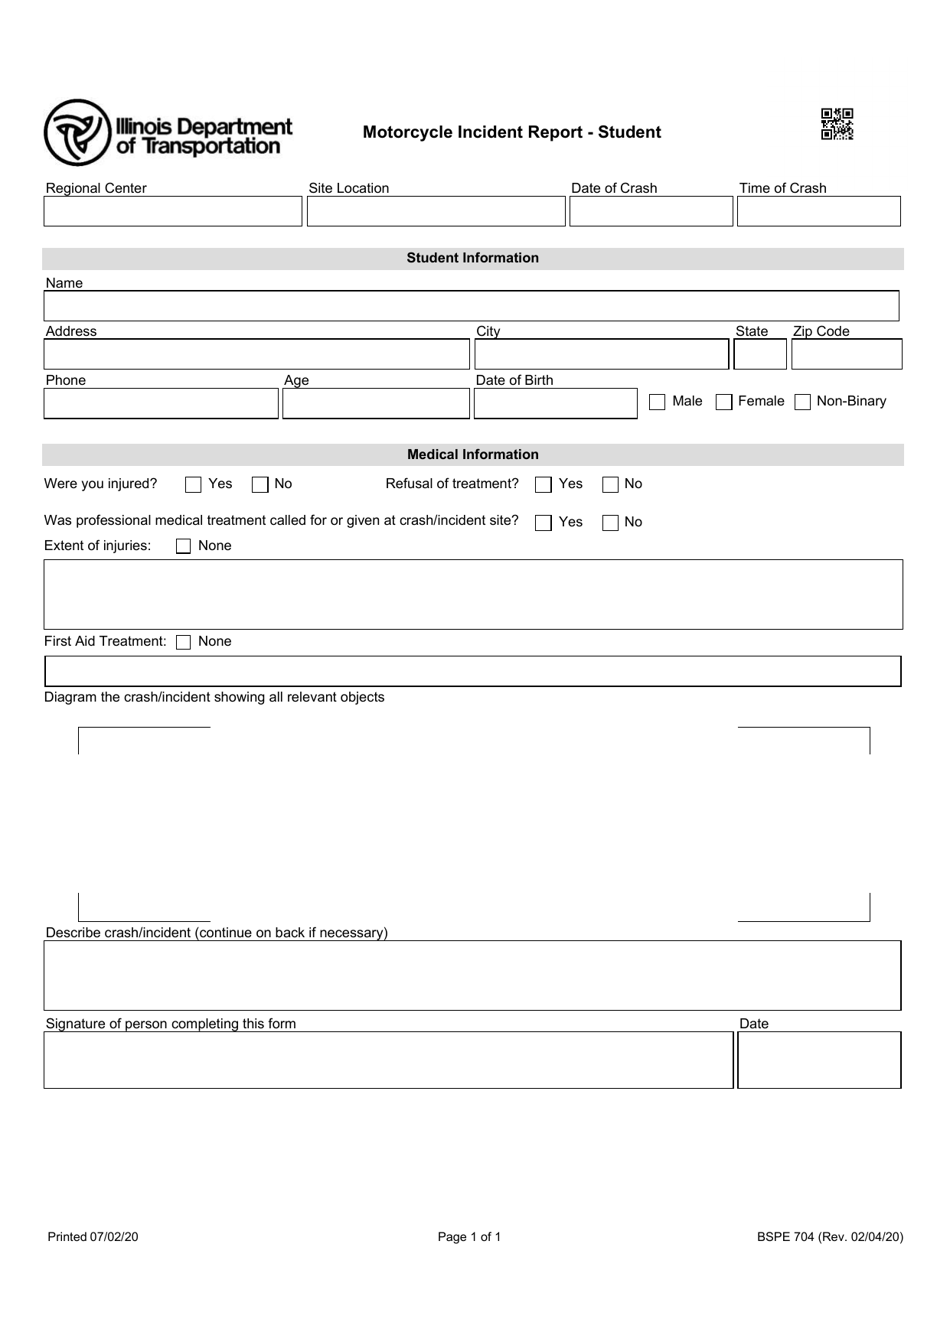 Form BSPE704 Motorcycle Incident Report - Student - Illinois, Page 1